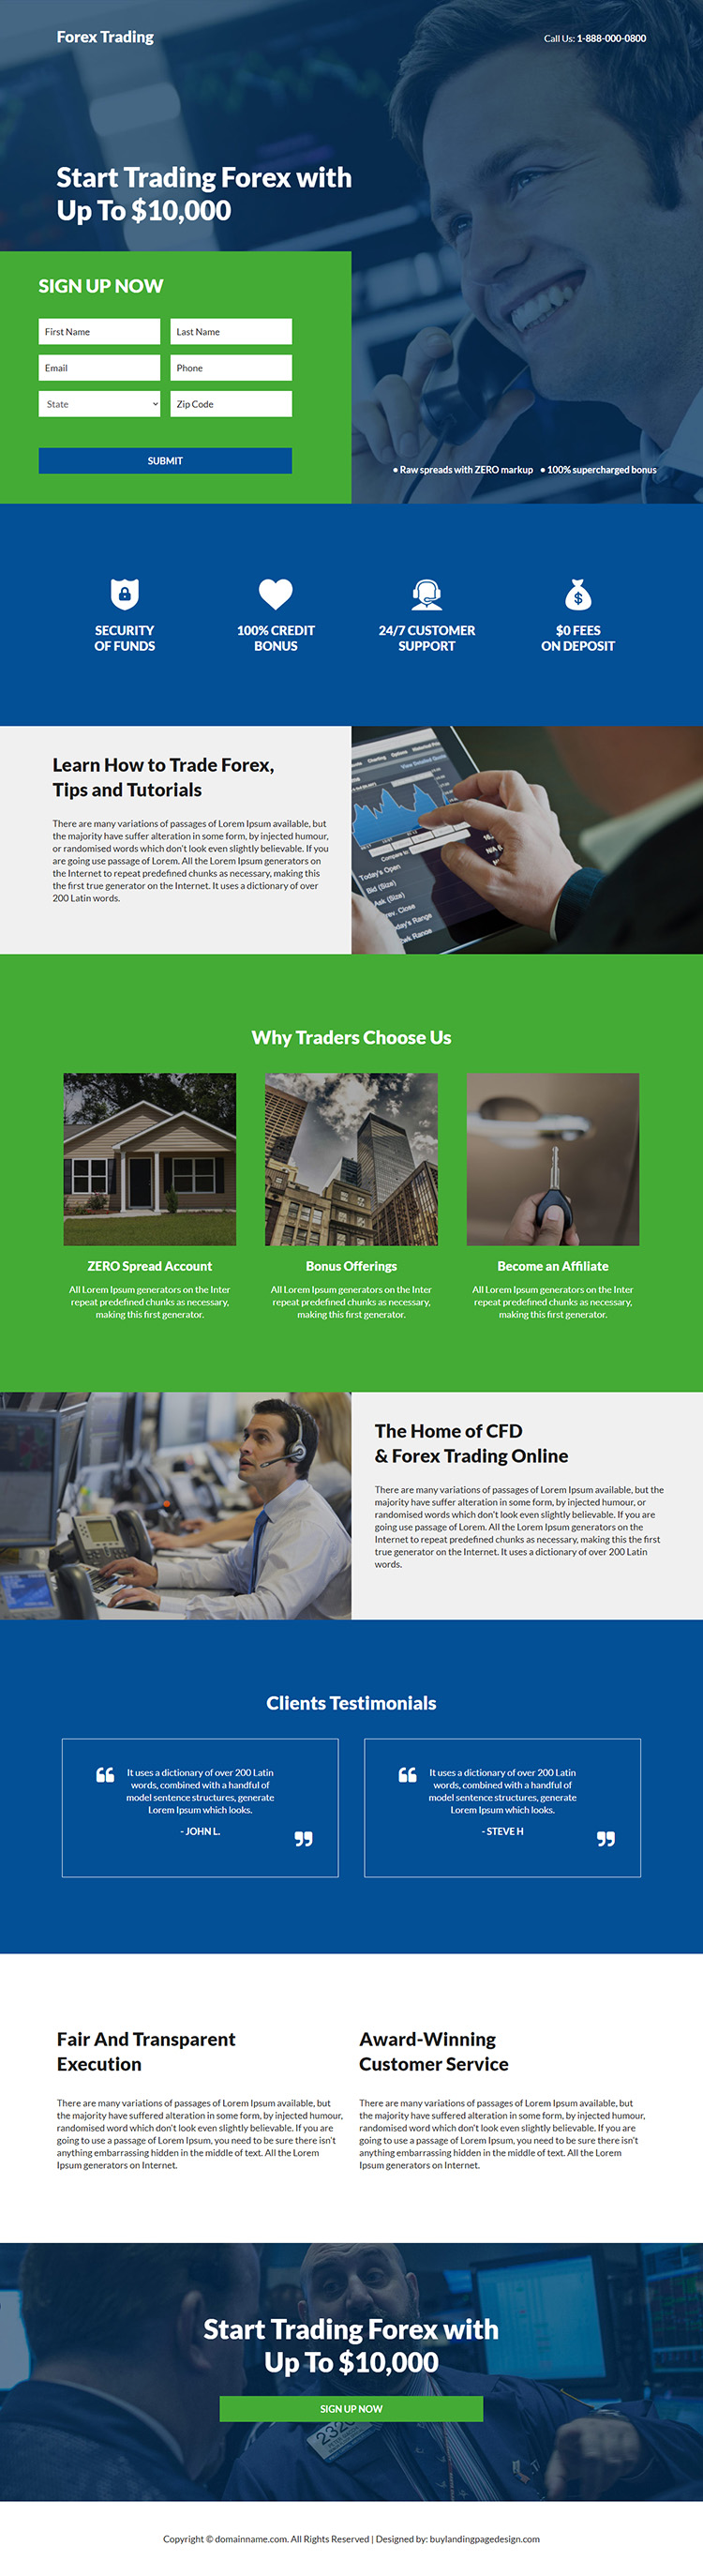 online forex trading tips and tutorials responsive landing page design